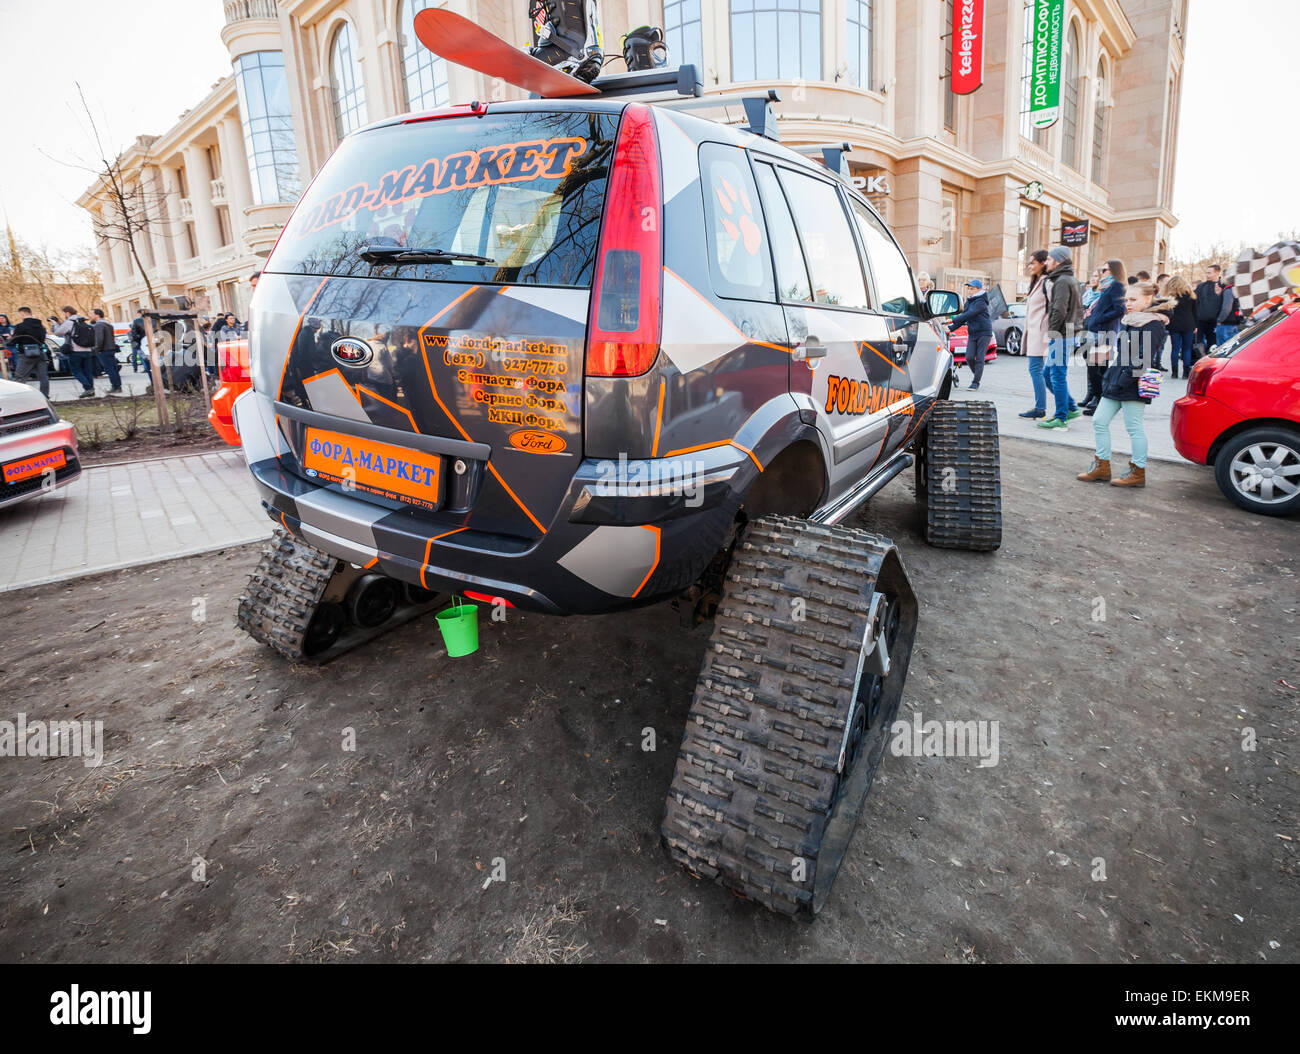 Saint-Petersburg, Russia - April 11, 2015: All-terrain cross-country vehicle on tracks based on European modification of Ford Fu Stock Photo